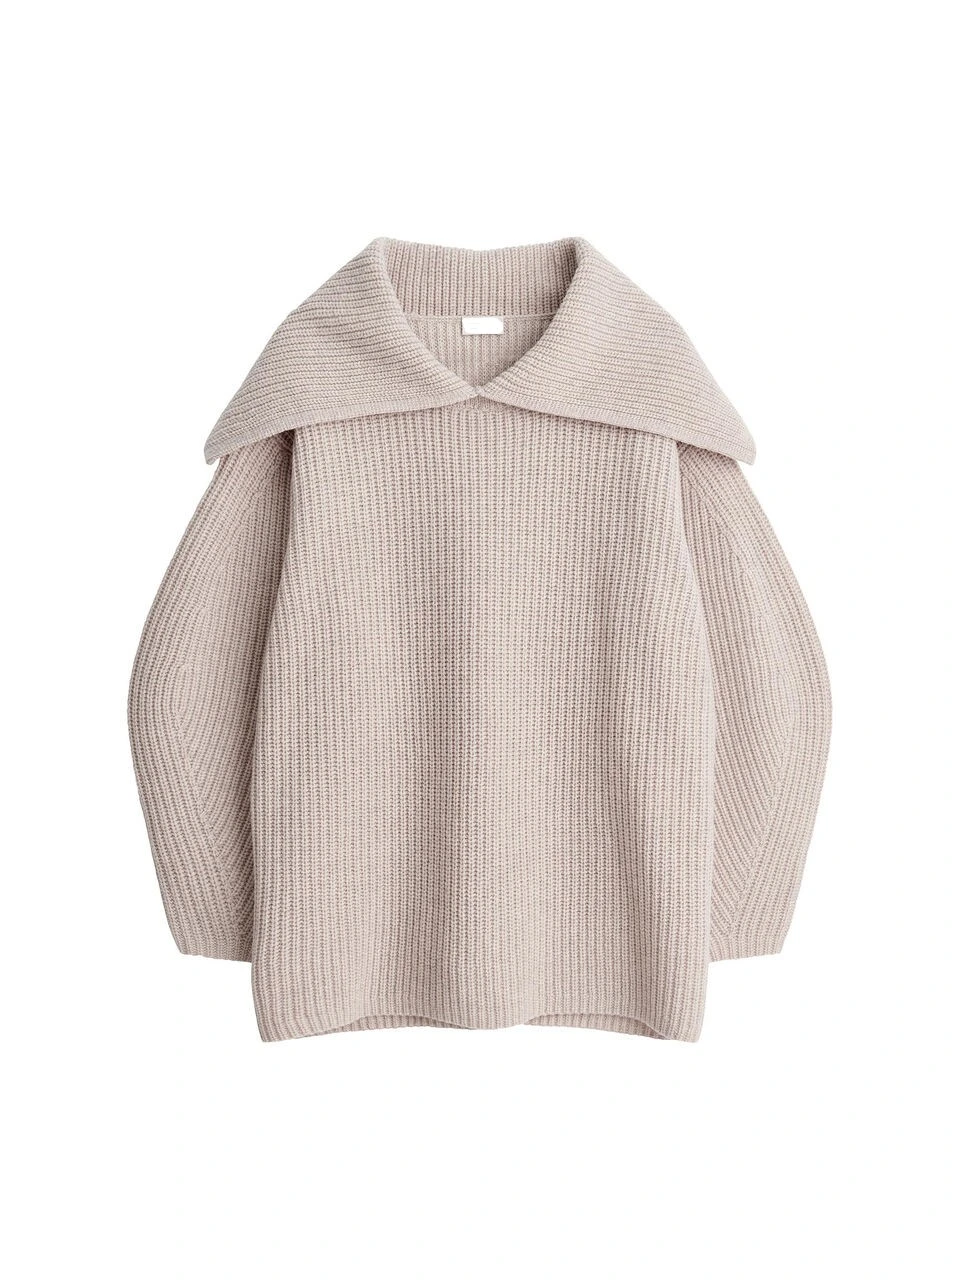 Ladies Hollow Loose Stitching Knitted Sweater from Bangladesh